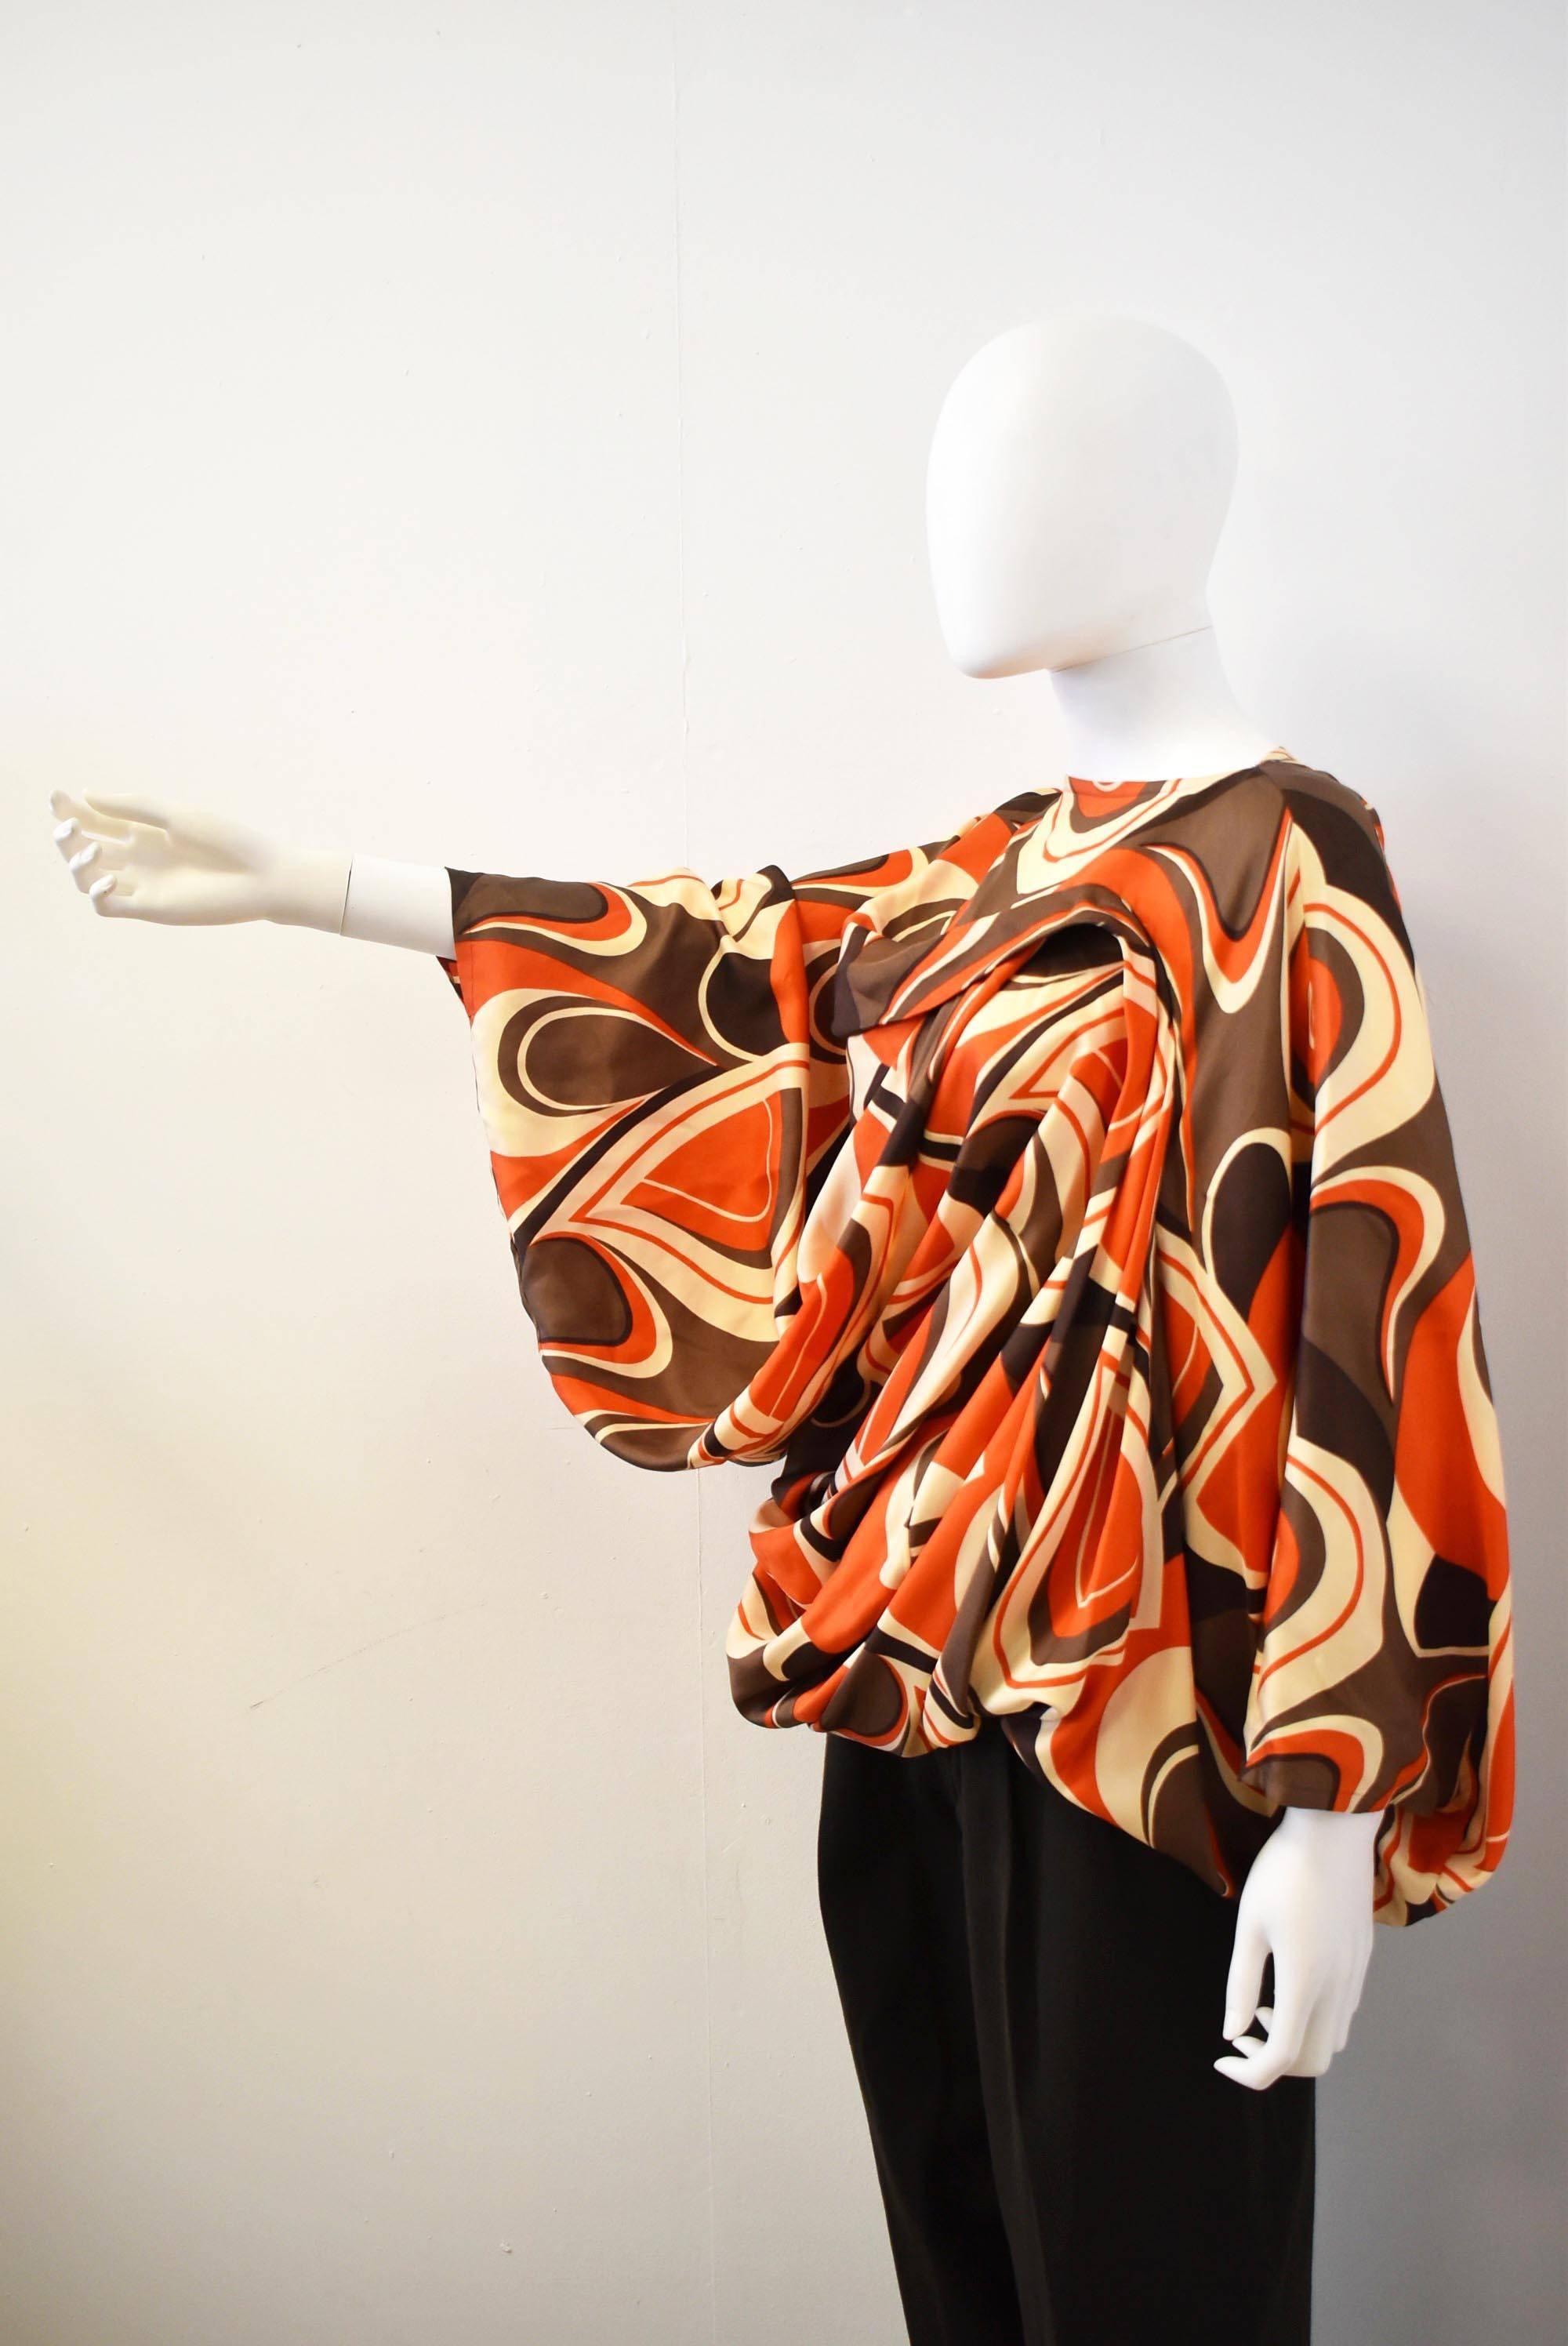 A beautiful silk batwing top with psychedelic orange, brown and beige print by Junya Watanabe. The unusual top has oversized sleeves, and a curved, twisted shape that creates drapes and folds that adapt to the form and movement of the body. The top